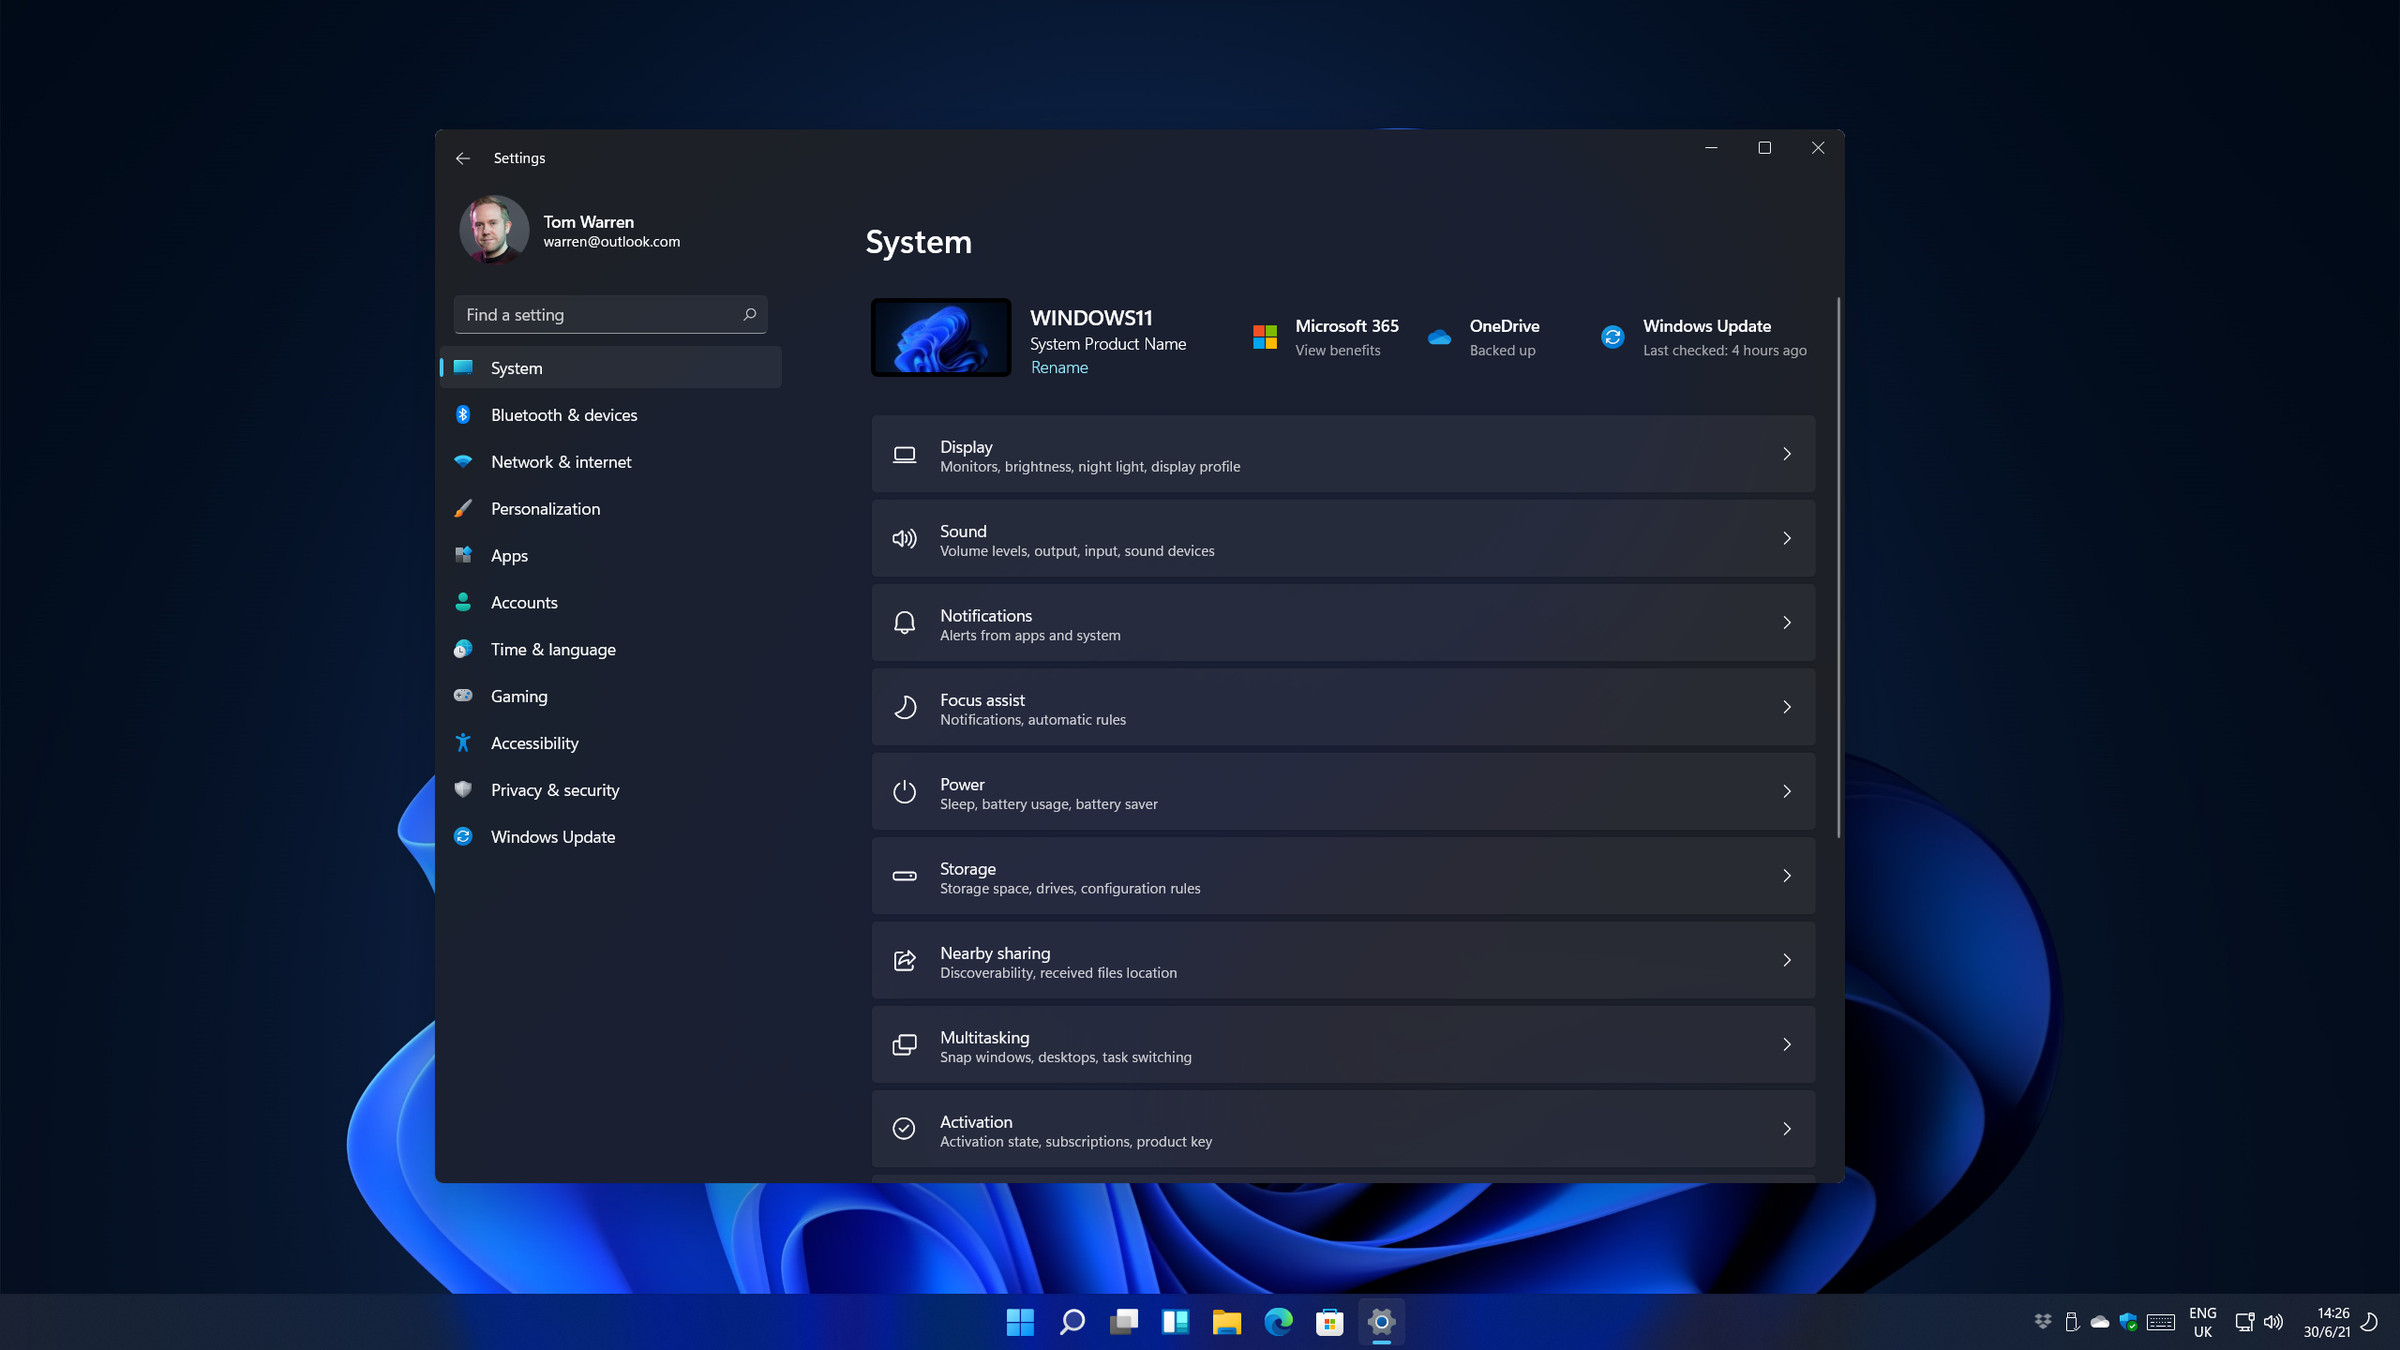 The new Settings in Windows 11 looks great.